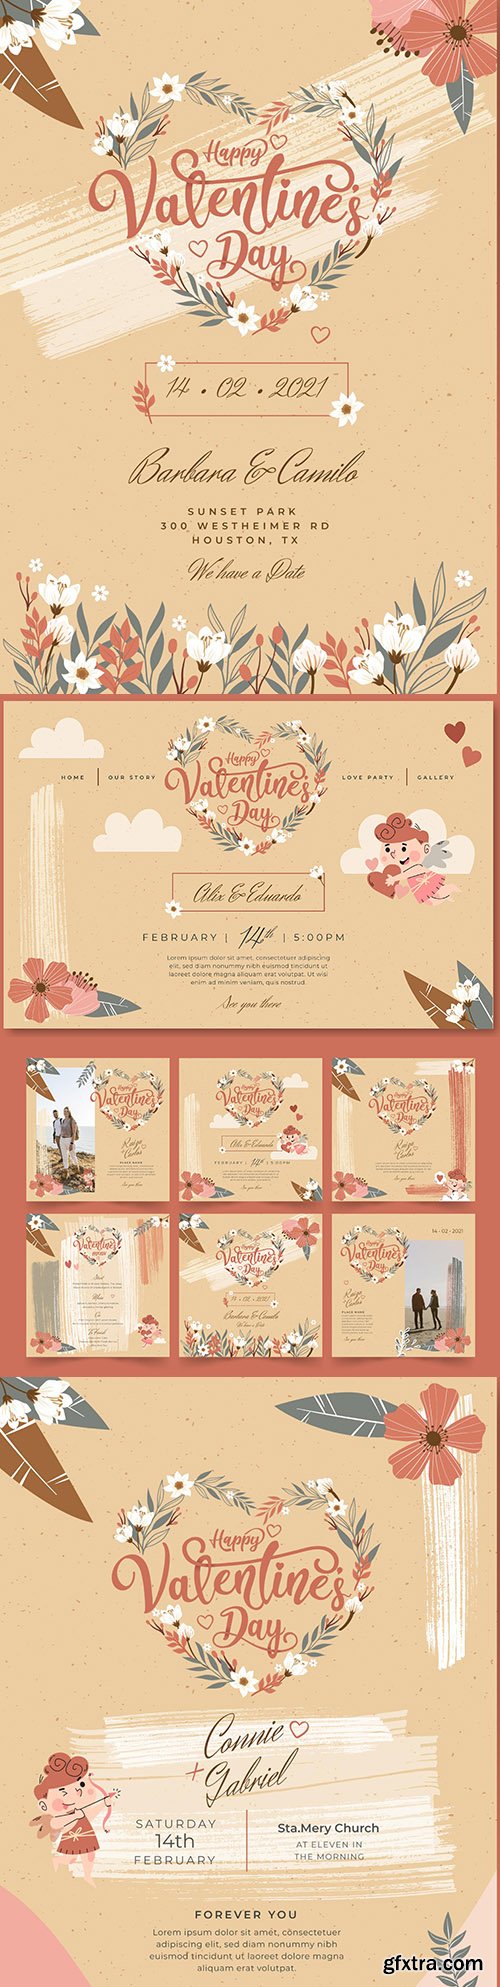 Valentine's Day postcard and instagram messages
